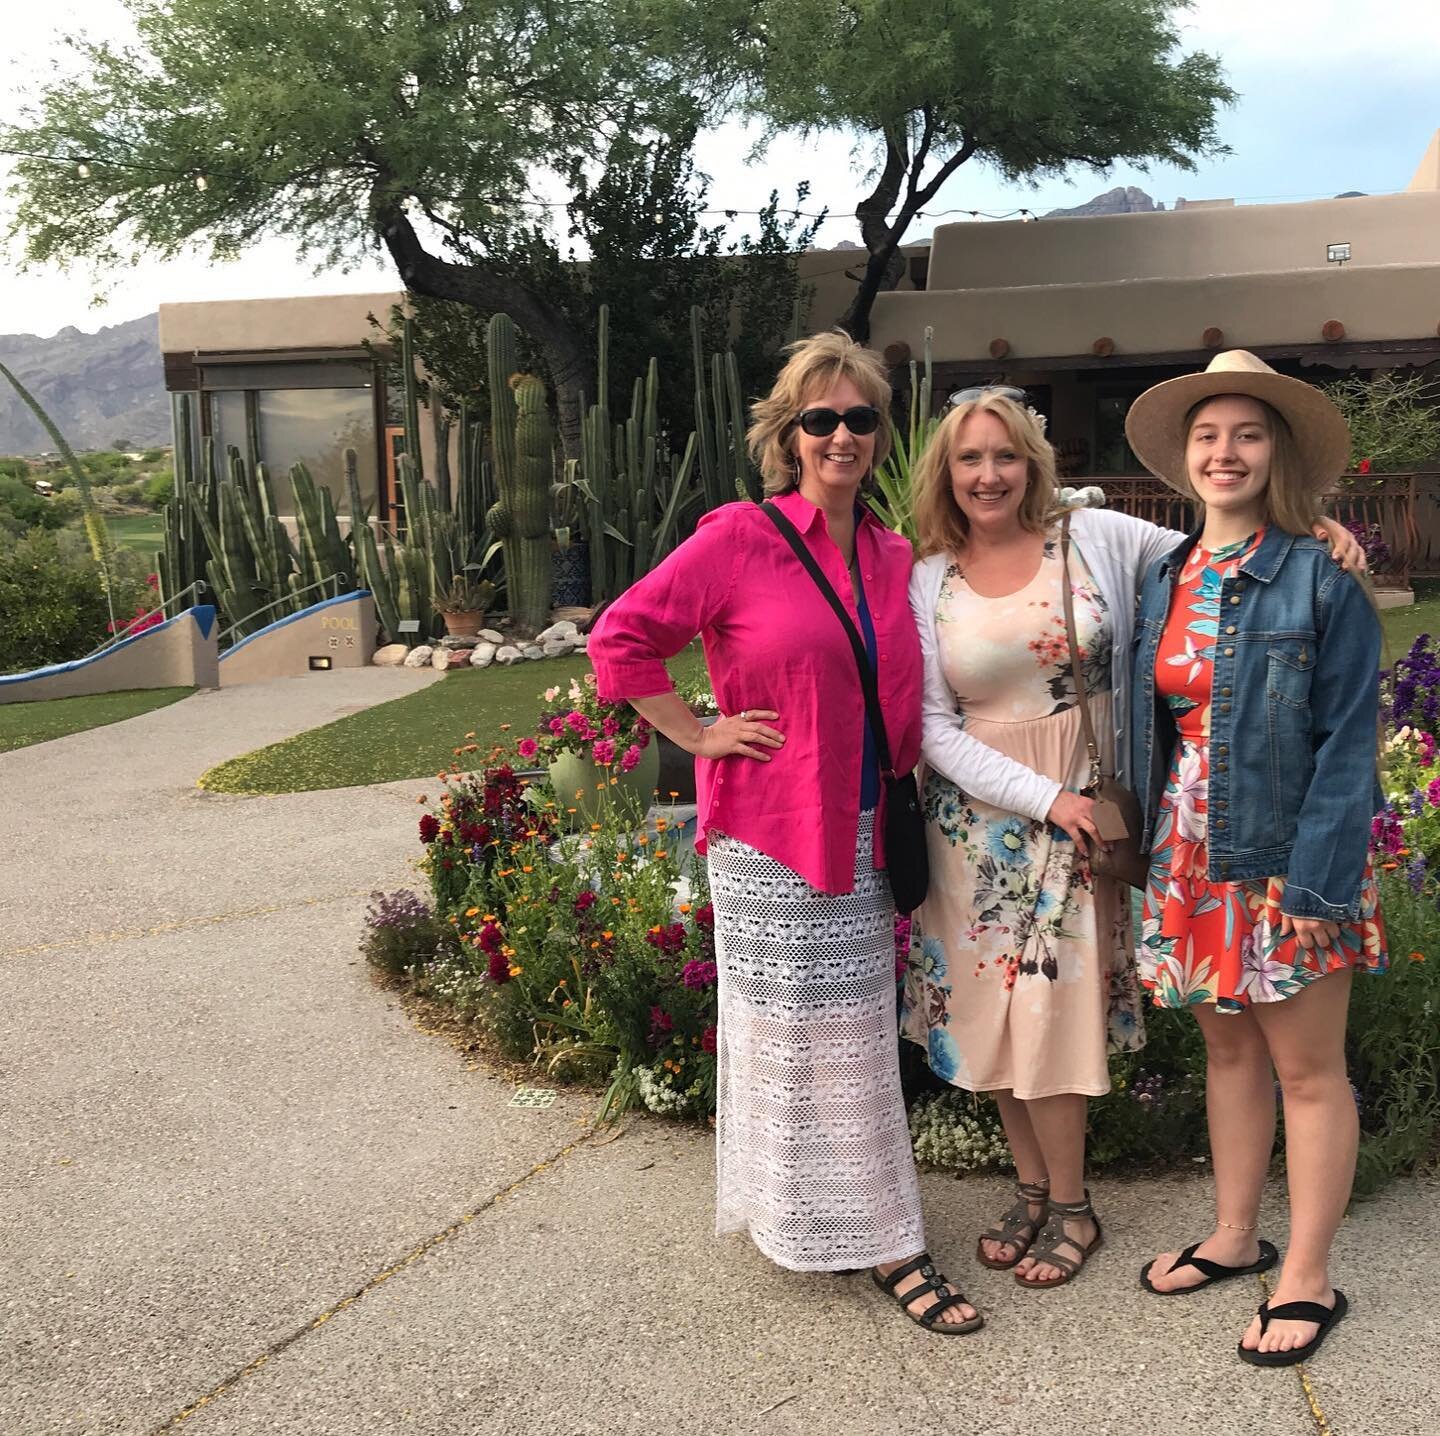 My sister, Colleen, and niece, Amber, came to visit Tucson last spring and I&rsquo;m finally sorting through the photos! #sisterlove #niecelove #anotherdayinparadise #sonoranspring